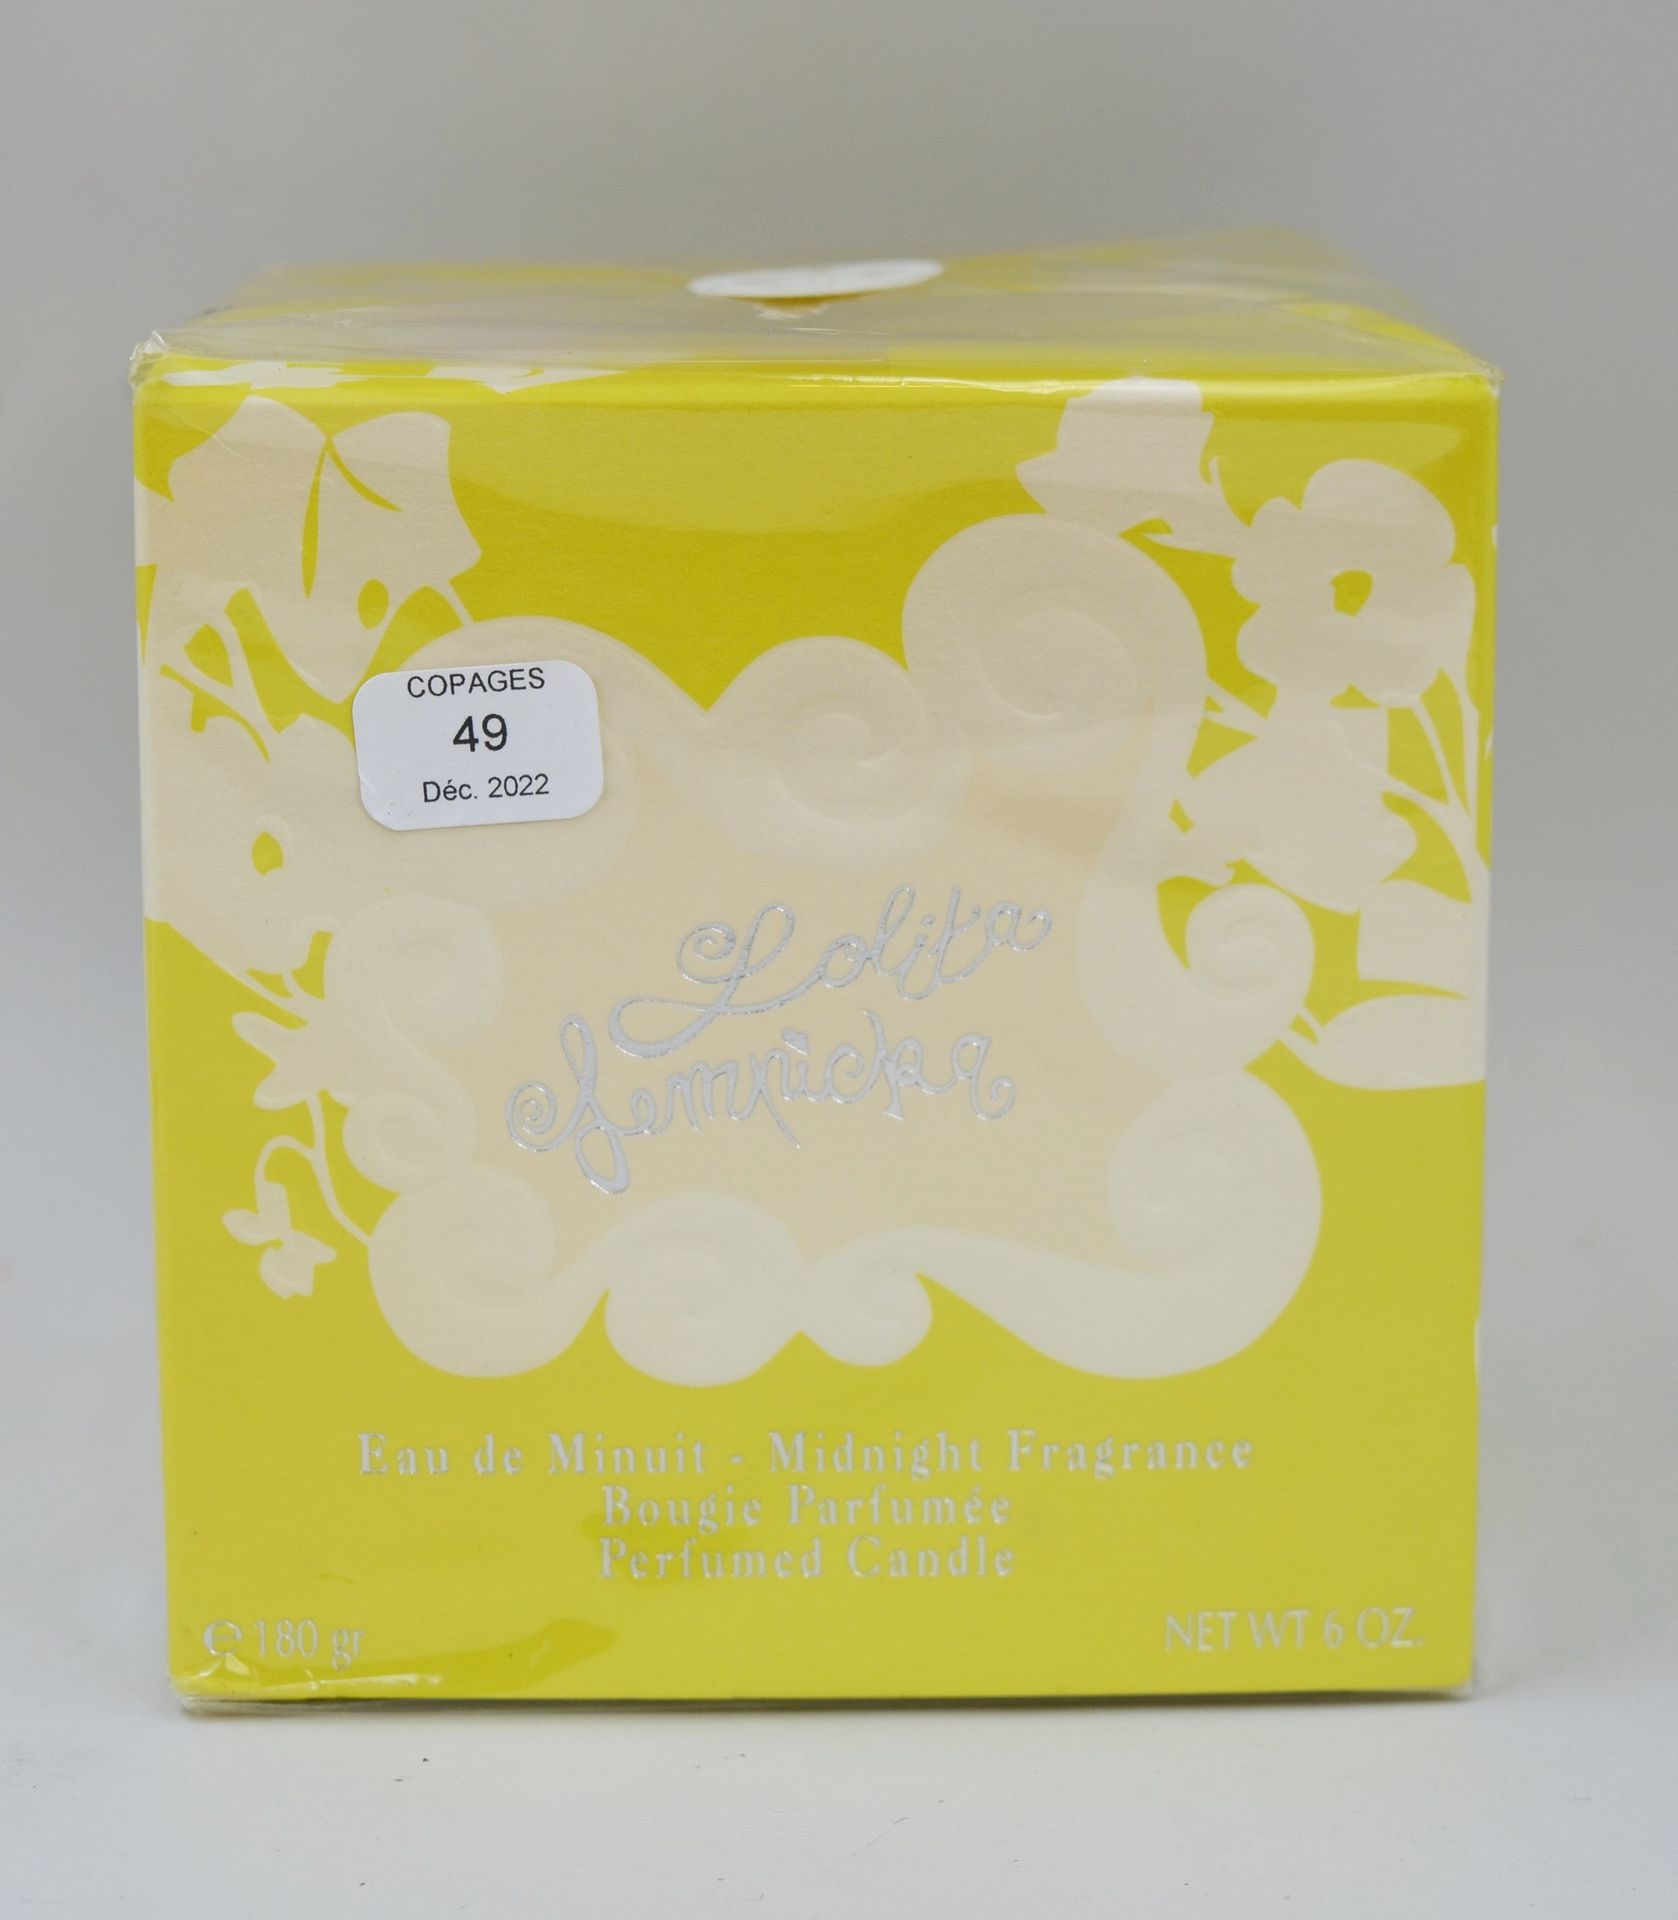 Null LOLITA LEMPICKA

Scented candle, limited edition.